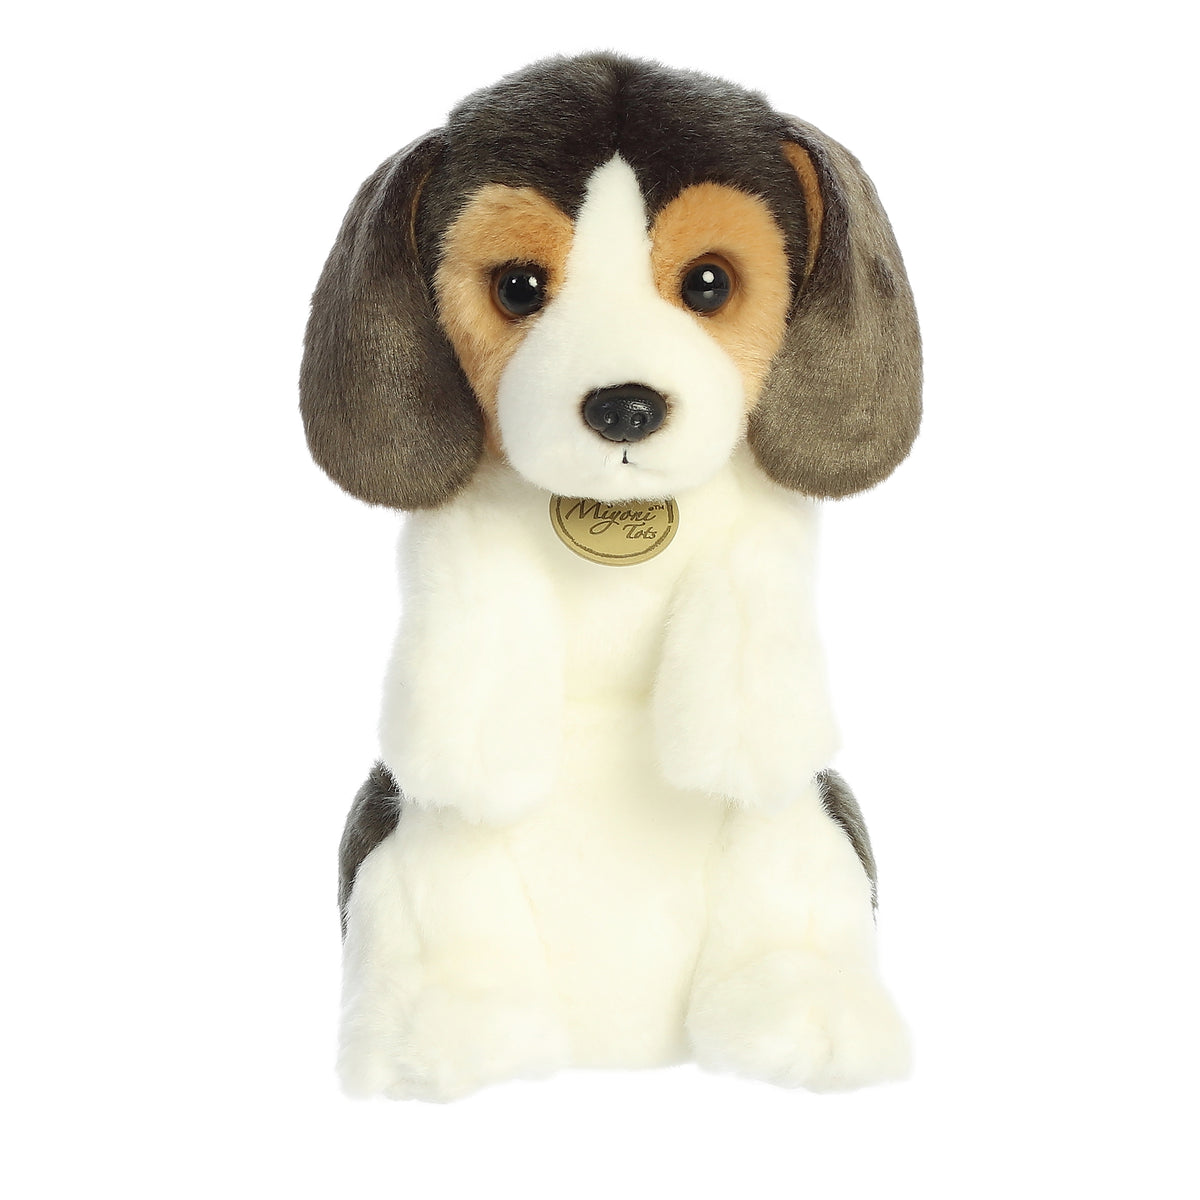 Adorable Beagle Pup plush in a sitting pose with a mix of white and brown hues, exuding charm and lifelike appeal.